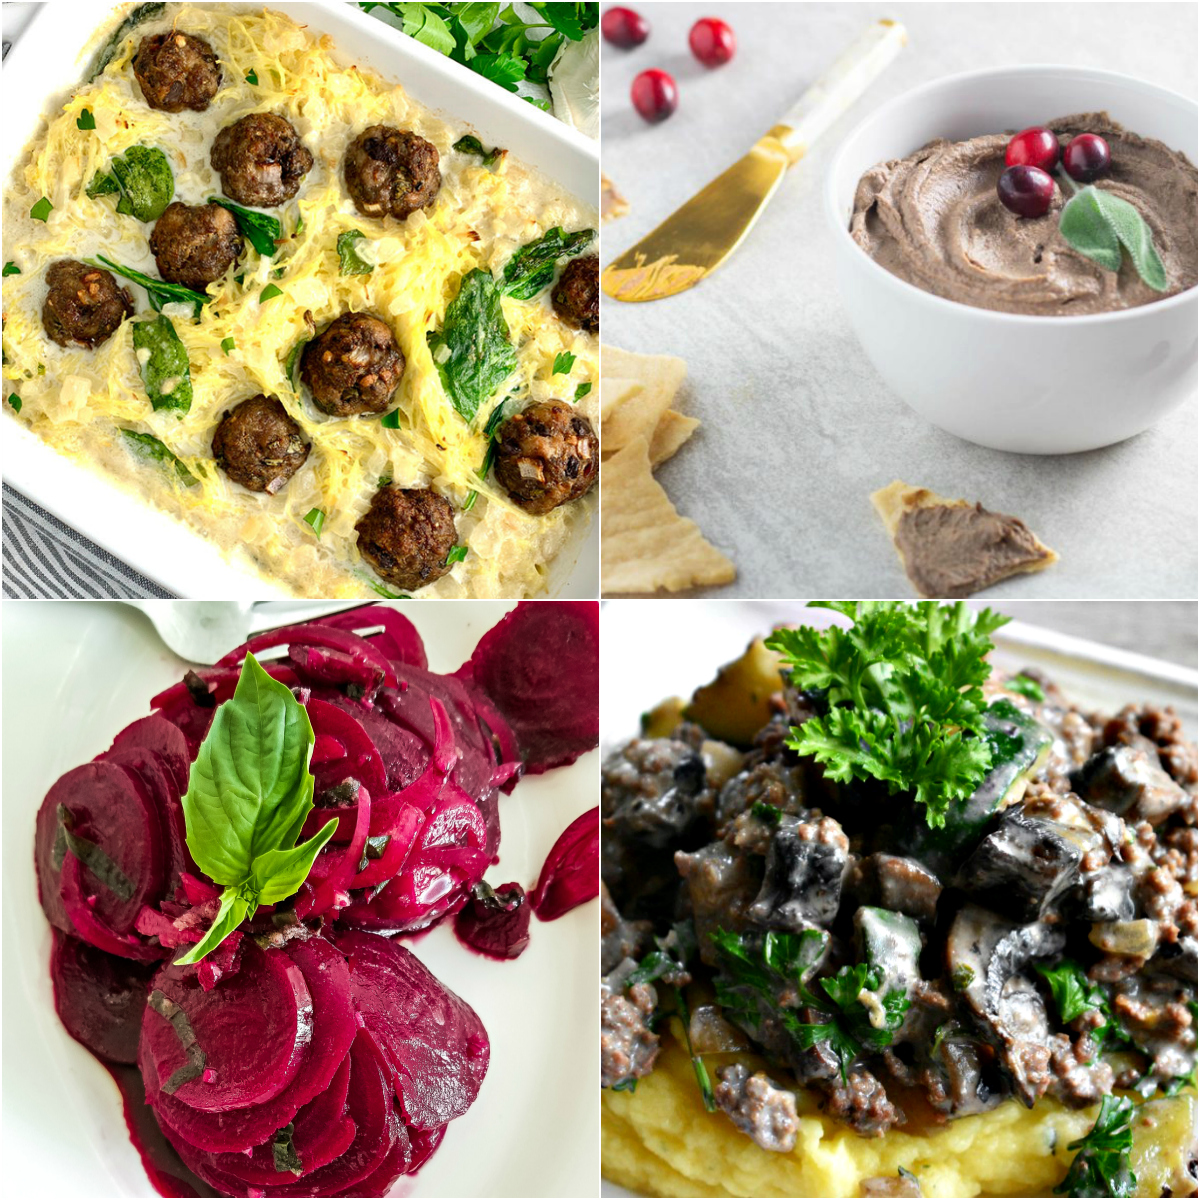 Paleo AIP Recipe Roundtable #314 | Phoenix Helix - *Featured Recipes: One-Pot Mediterranean Meatball Casserole, Marinated Beet Salad, Cranberry Chicken Liver Pâté, and Stroganoff and Mashed White Sweet Potatoes